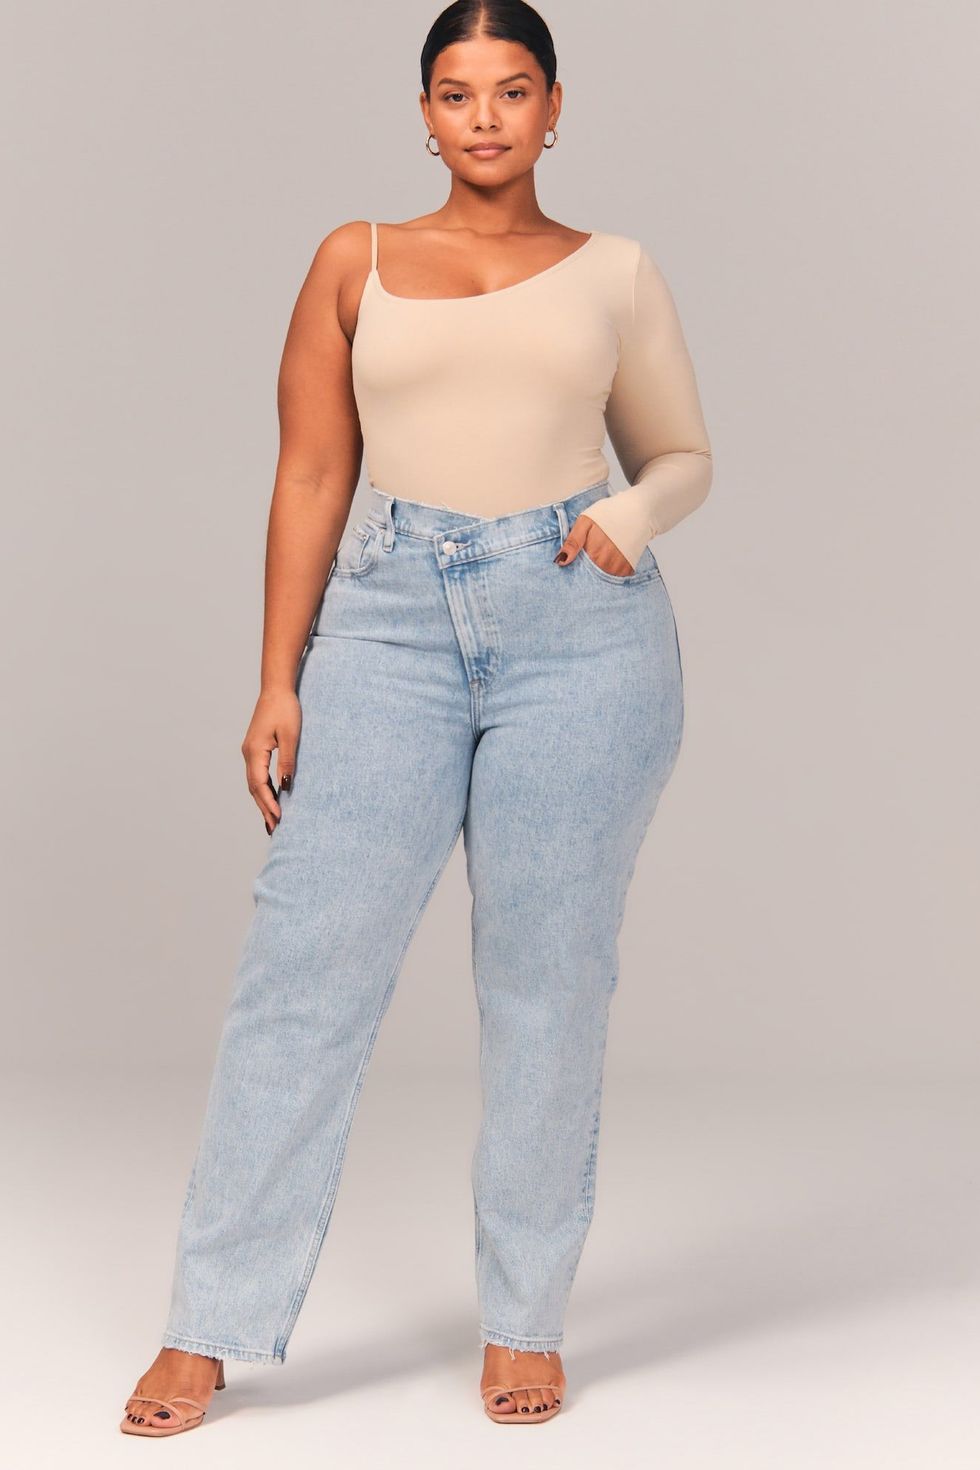 Women's Tall Cropped Jeans